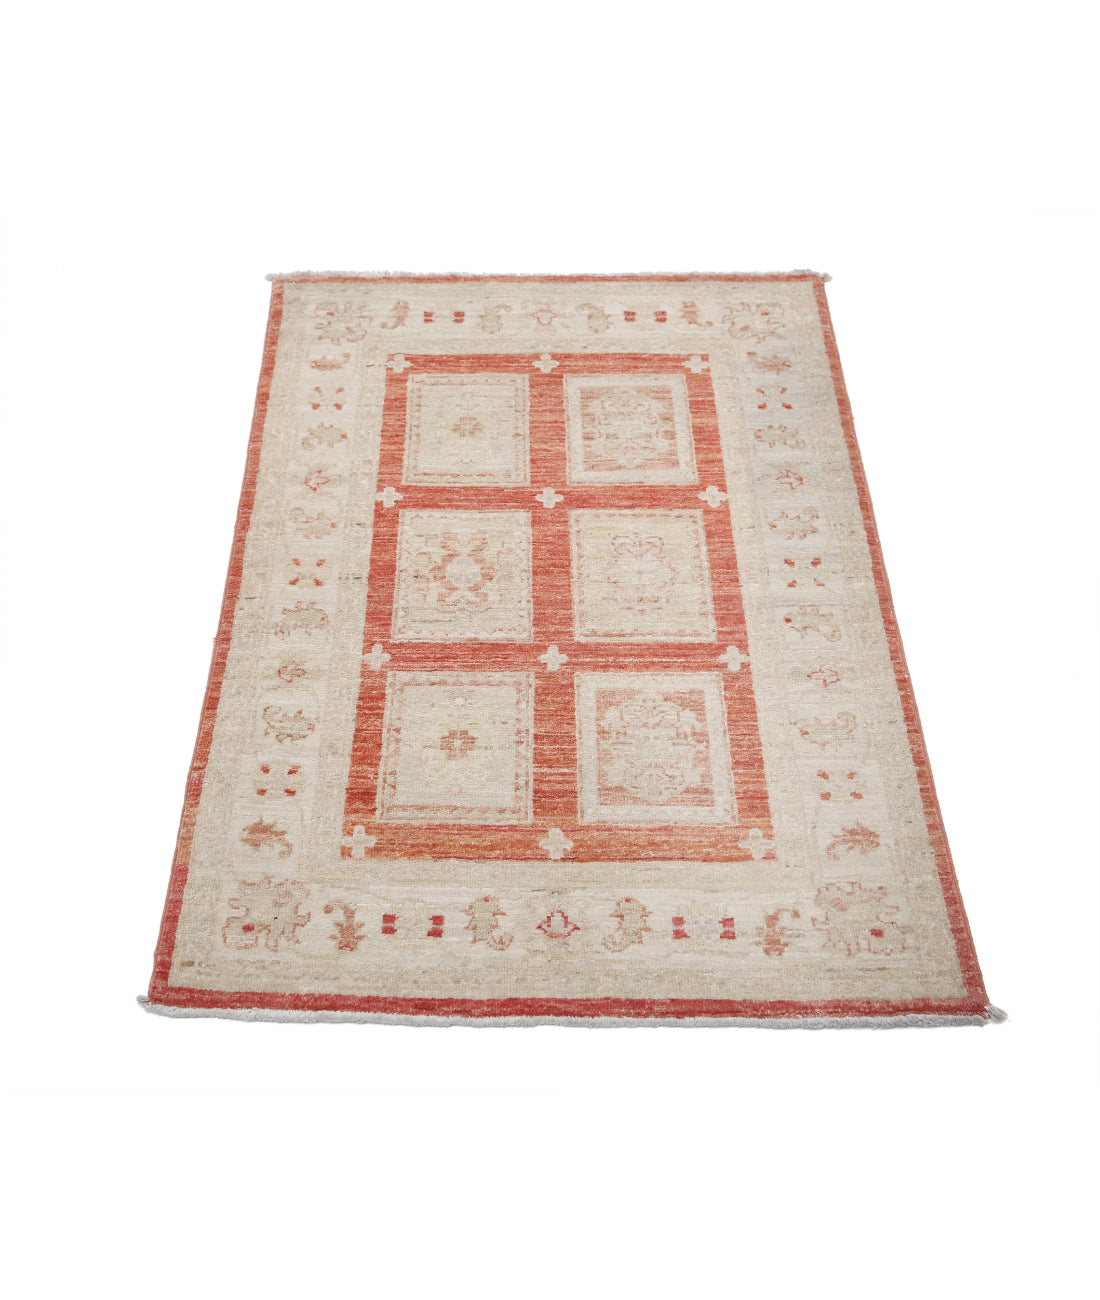 Hand Knotted Bakhtiari Wool Rug - 2'8'' x 3'10'' 2'8'' x 3'10'' (80 X 115) / Red / Ivory